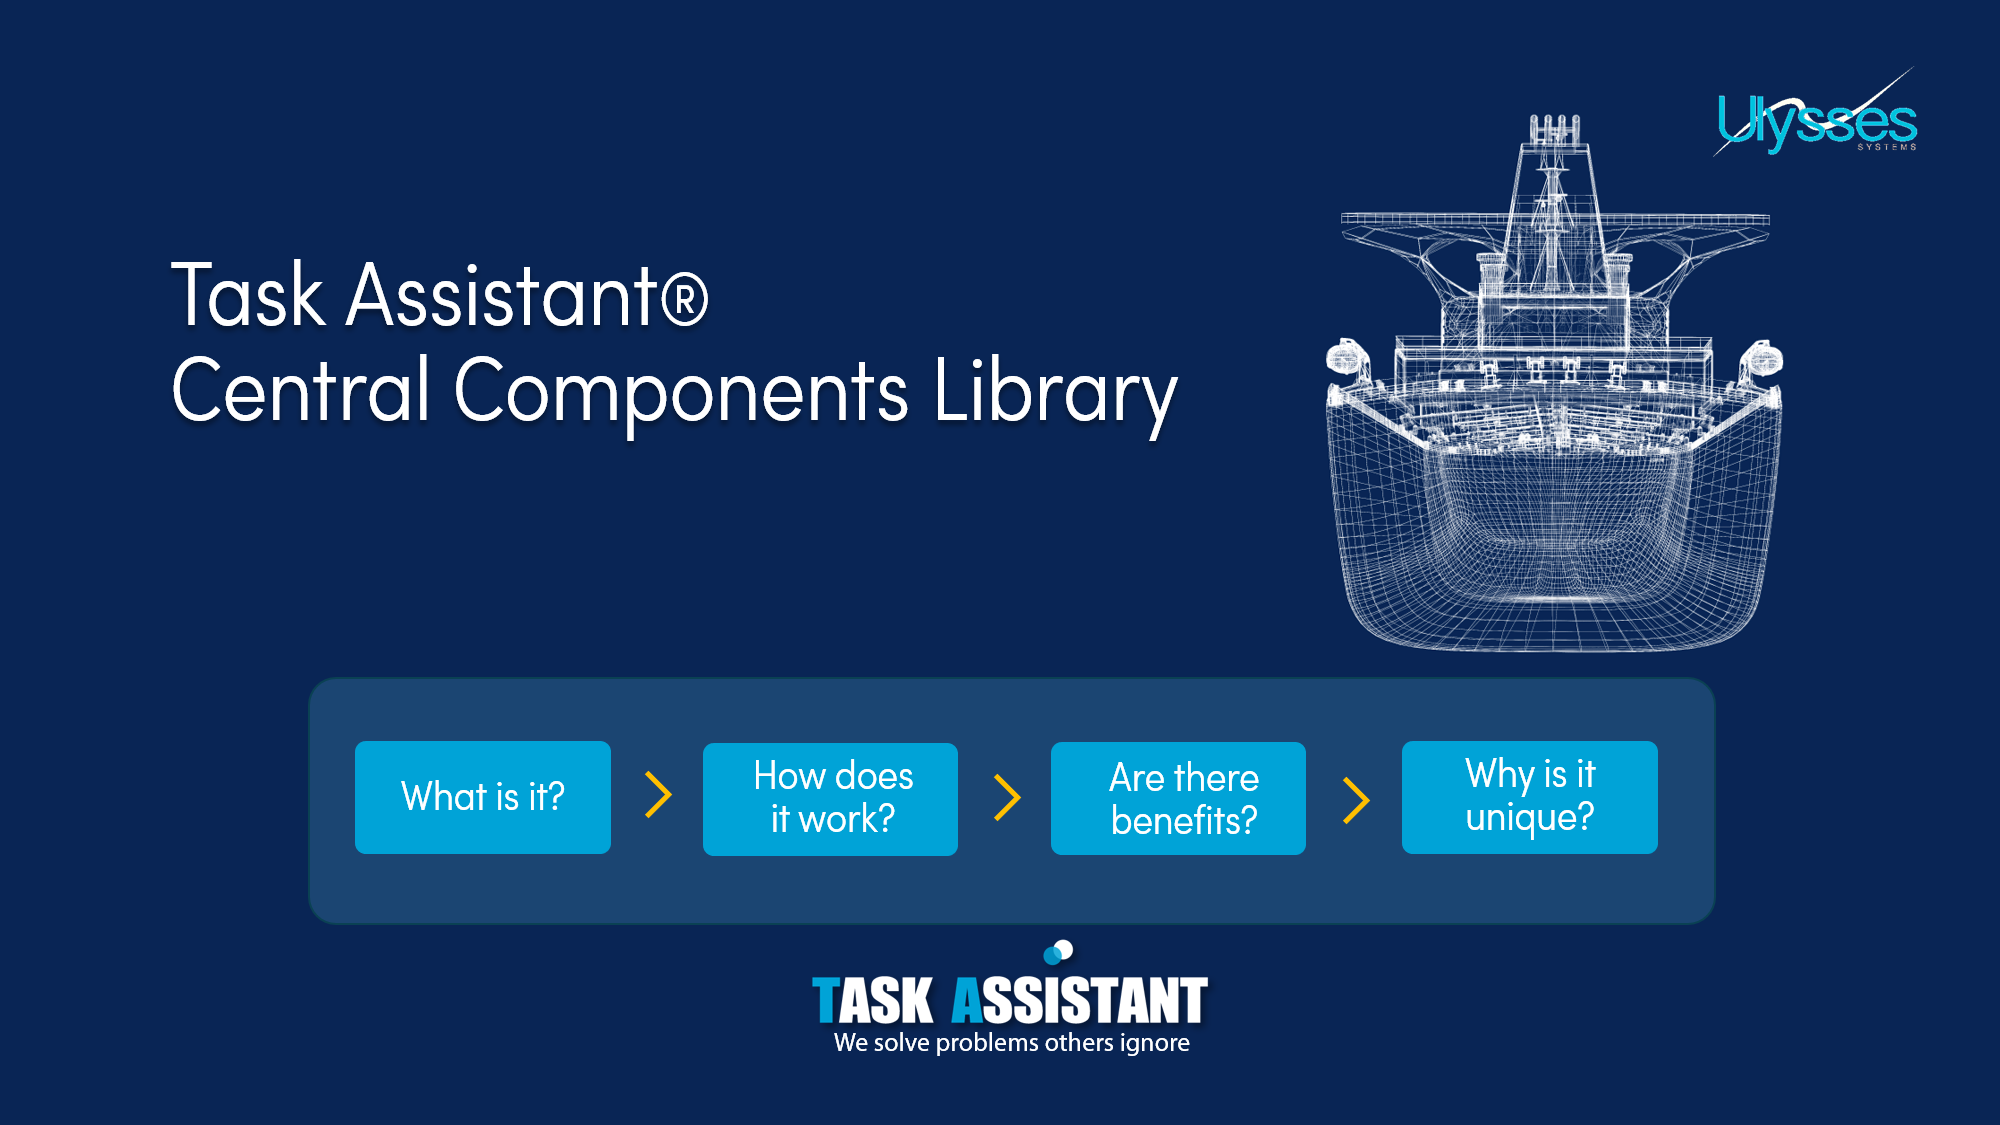 Task Assistant® Central Components Library